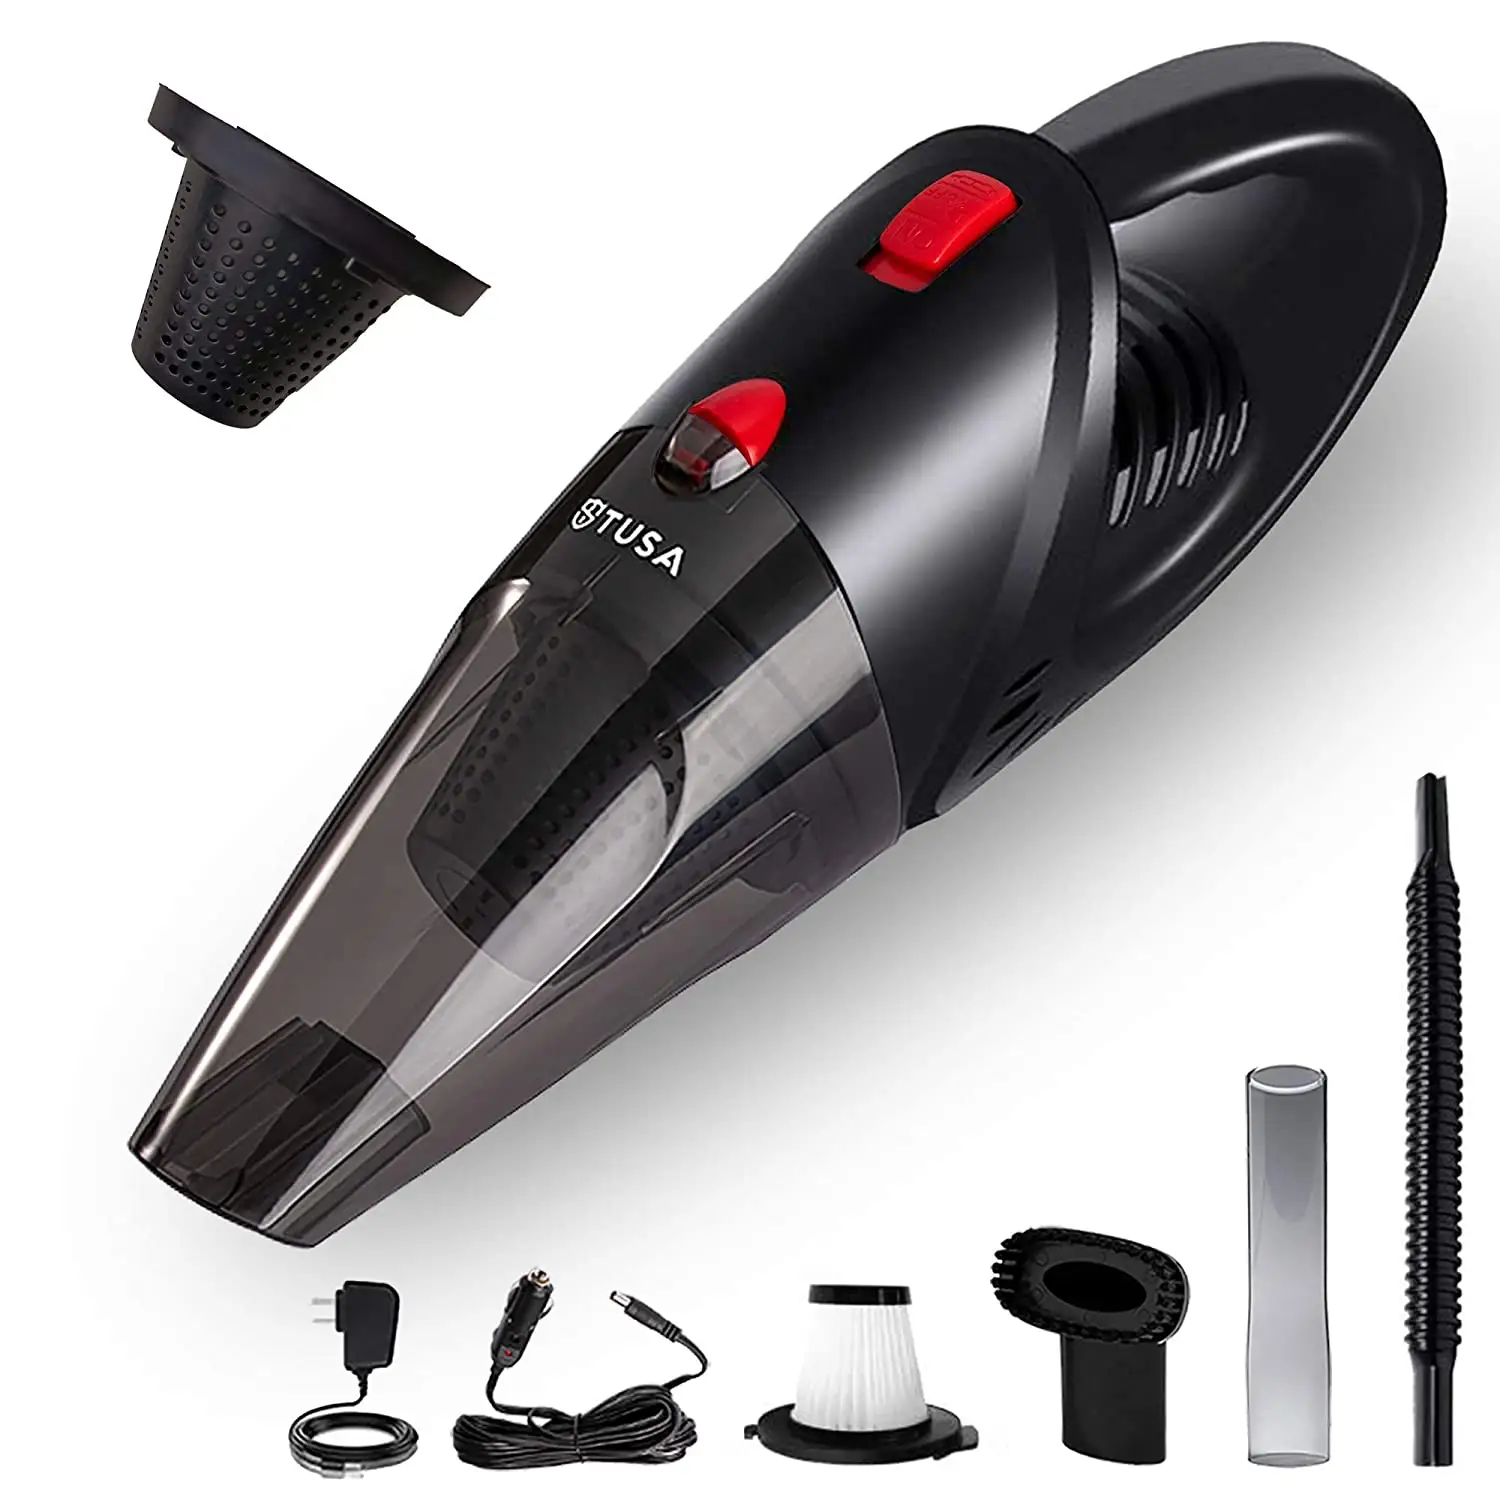 Thisvc Cordless Handheld Powerful Suction Sweeper Car Vacuum Cleaner for Vehicle Home Car Dust